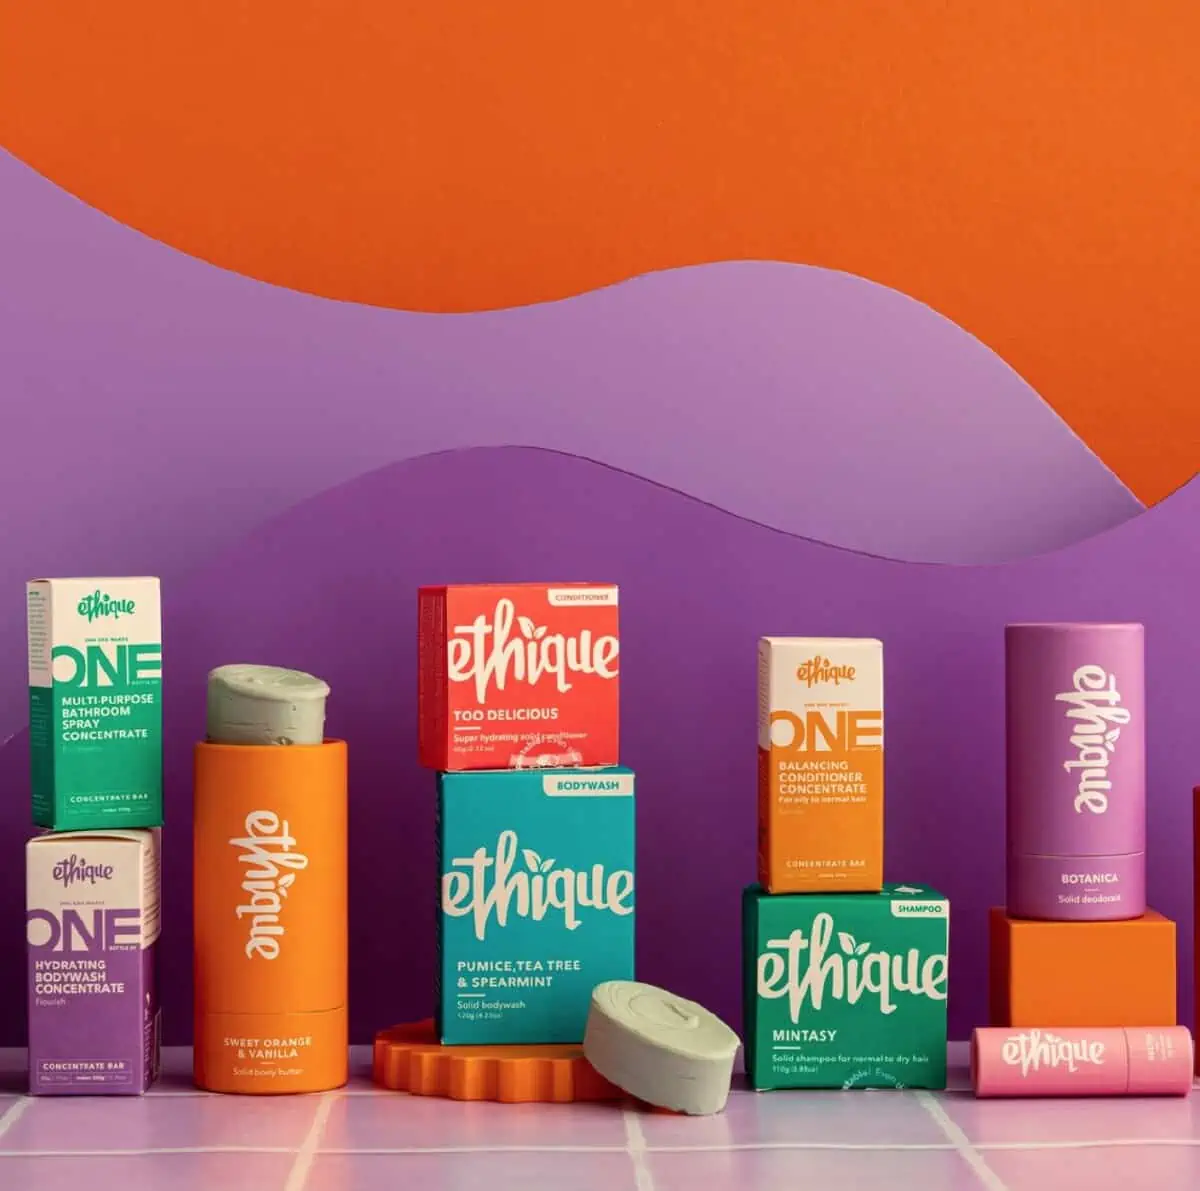 A line up of assorted Ethique vegan and eco-friendly products with a purple and orange patterned background. 